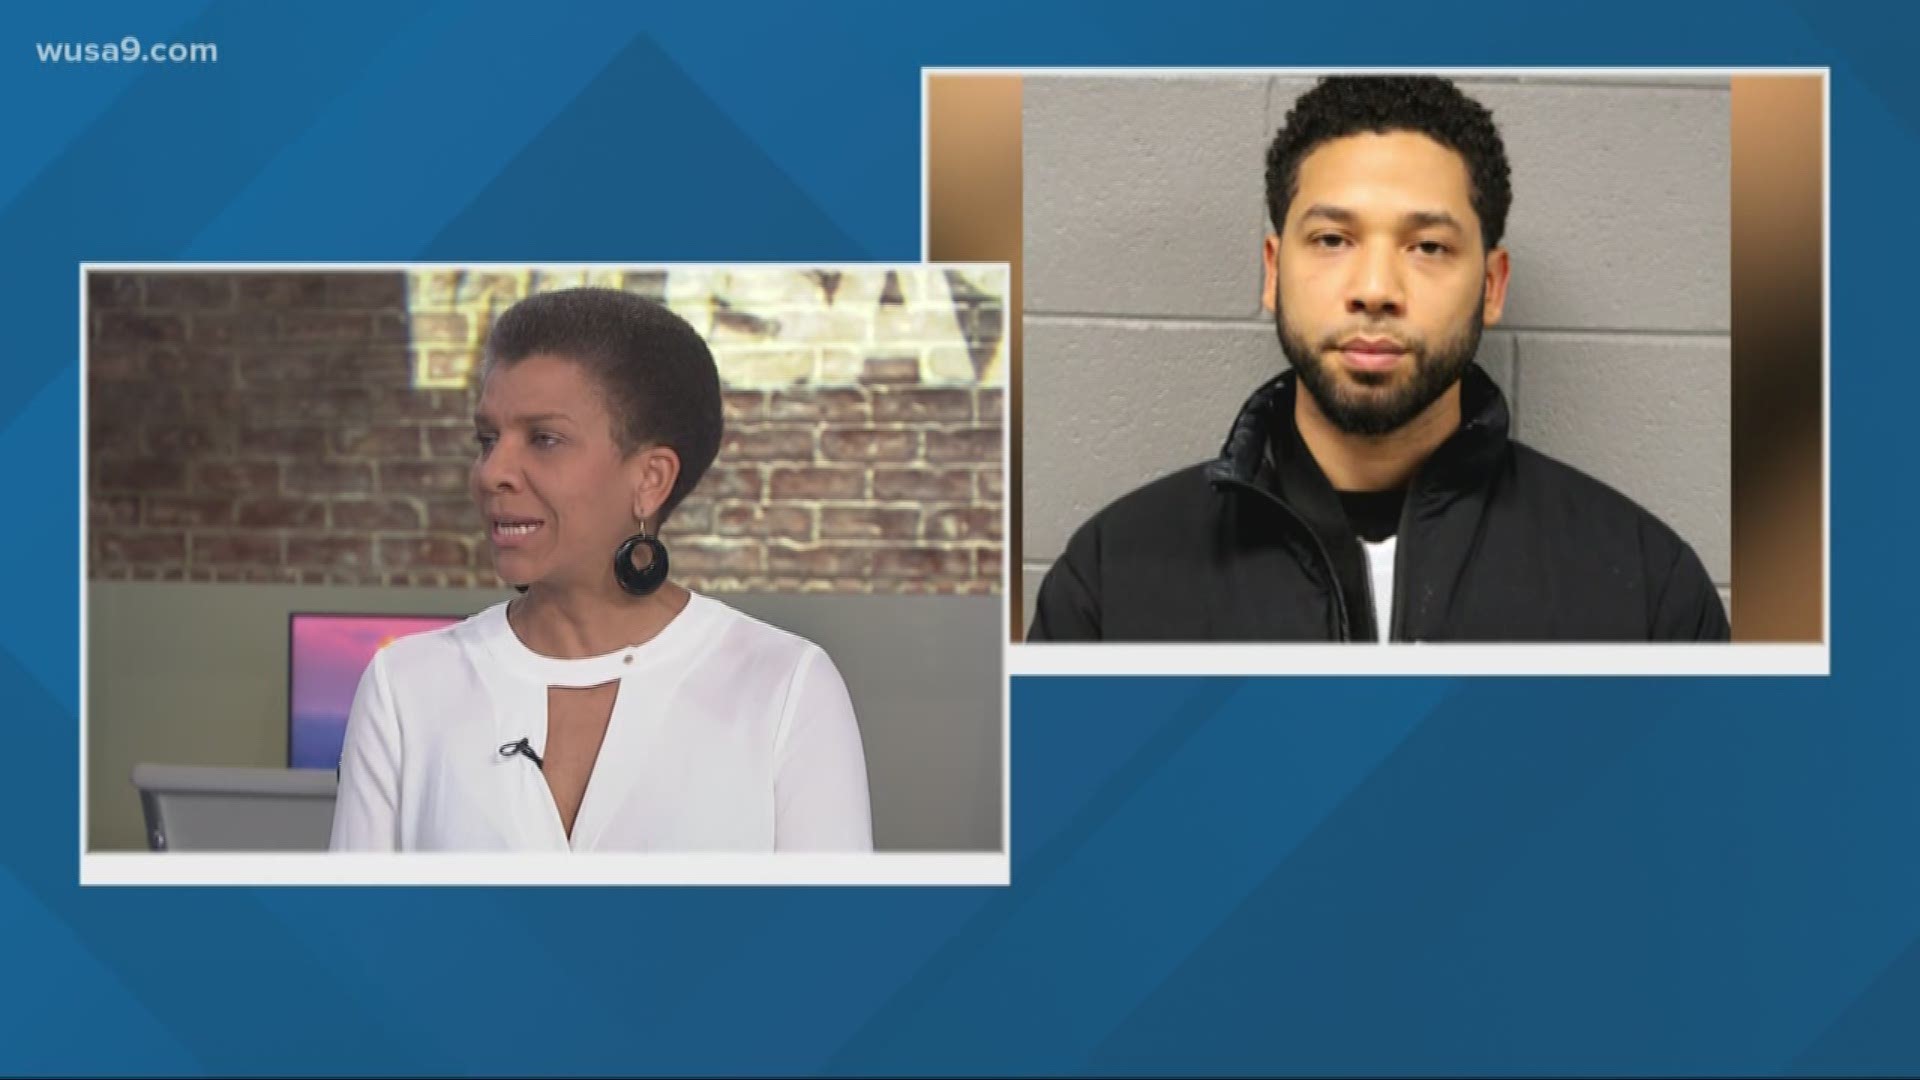 Is Jussie Smollett's career over? Our panel weighs in.